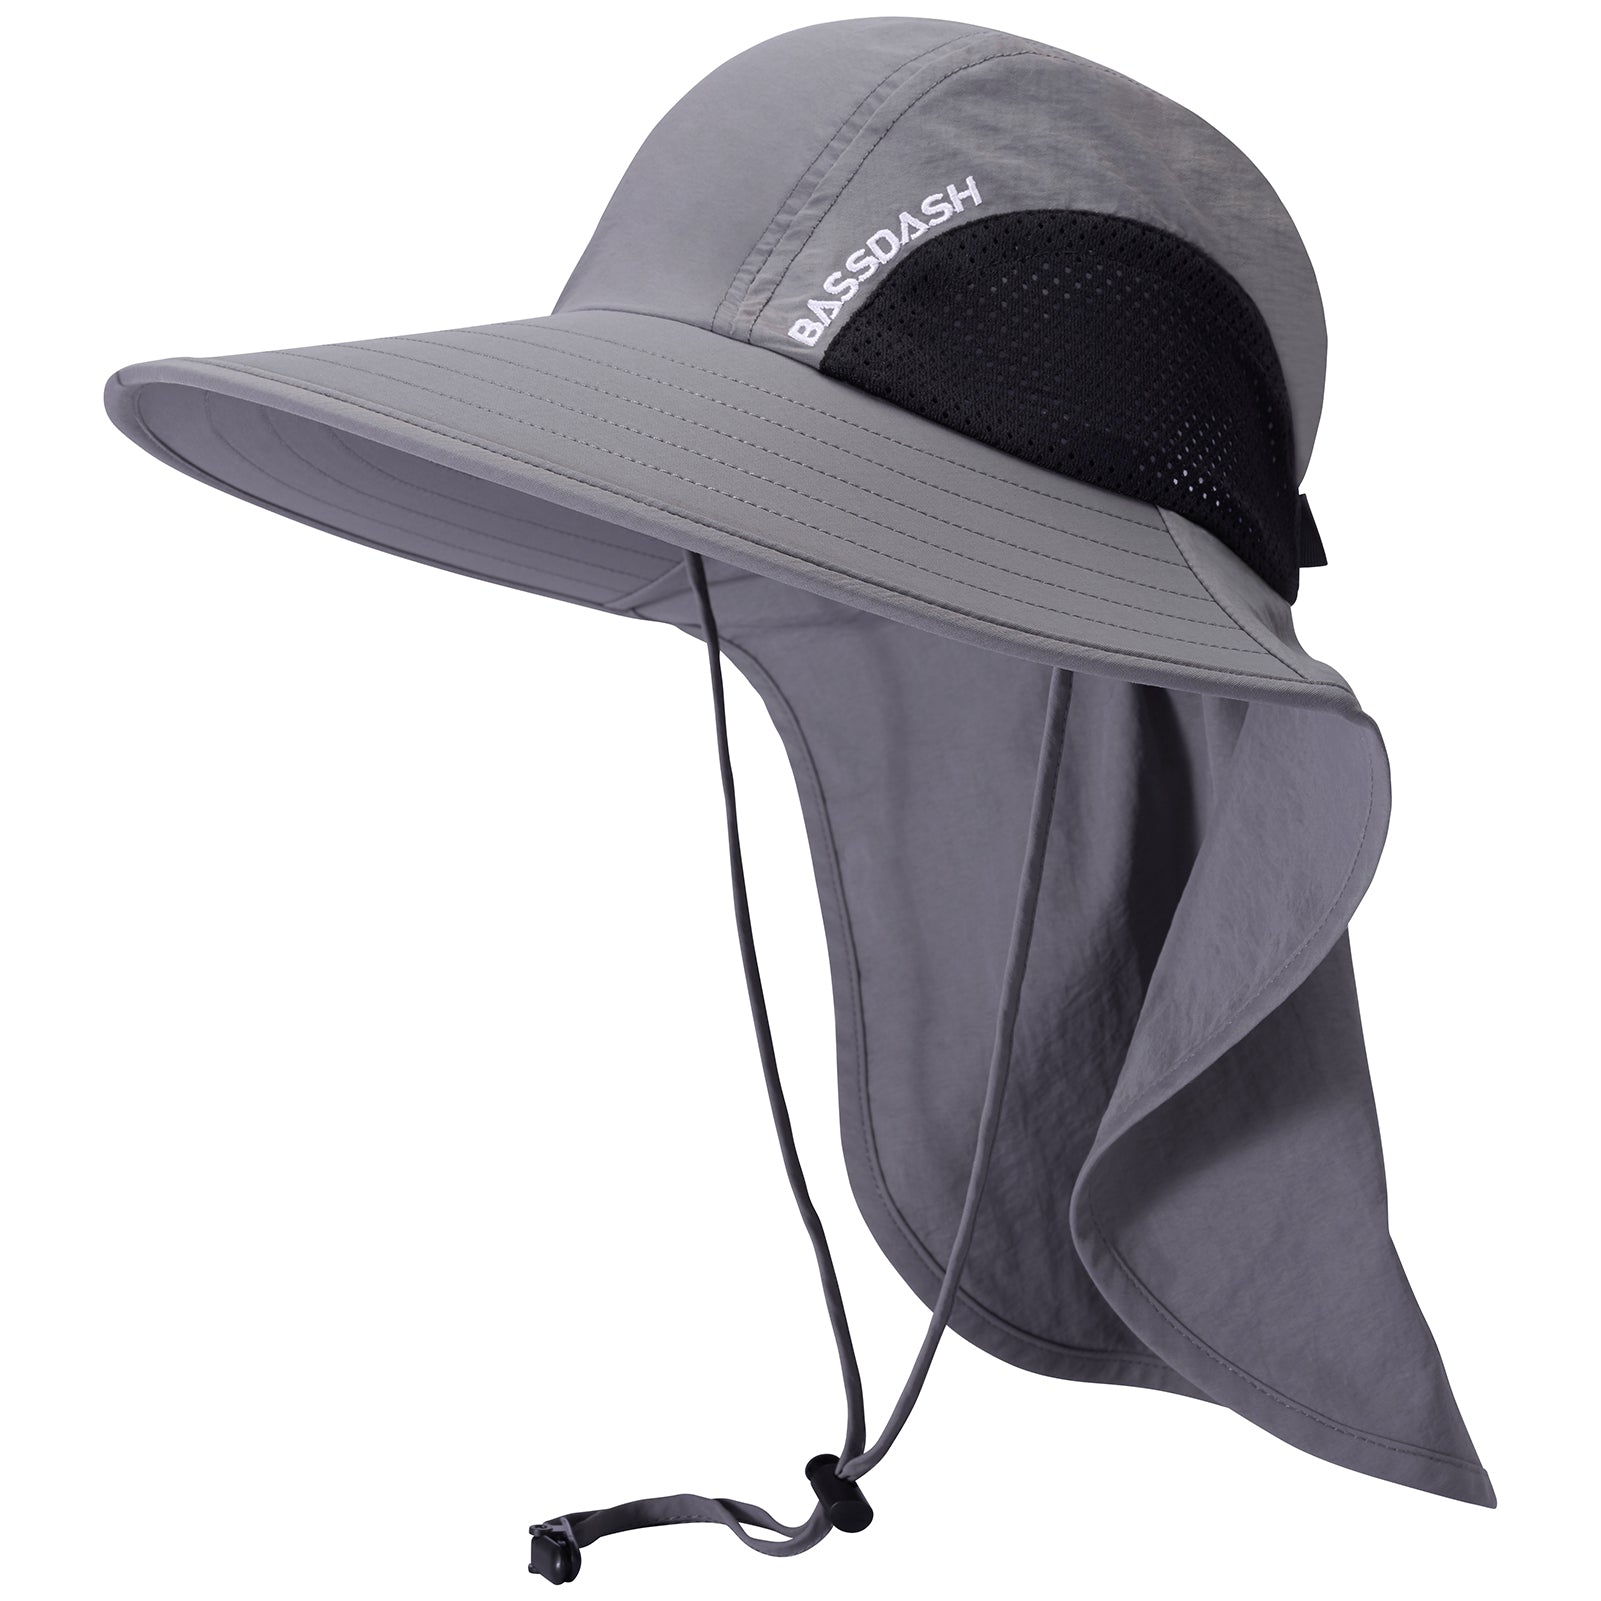 Bassdash Foldable UPF 50+ Fishing Hats with Removable Neck Flap Fh12, Dark Blue with Unfoldable Brim / One Size